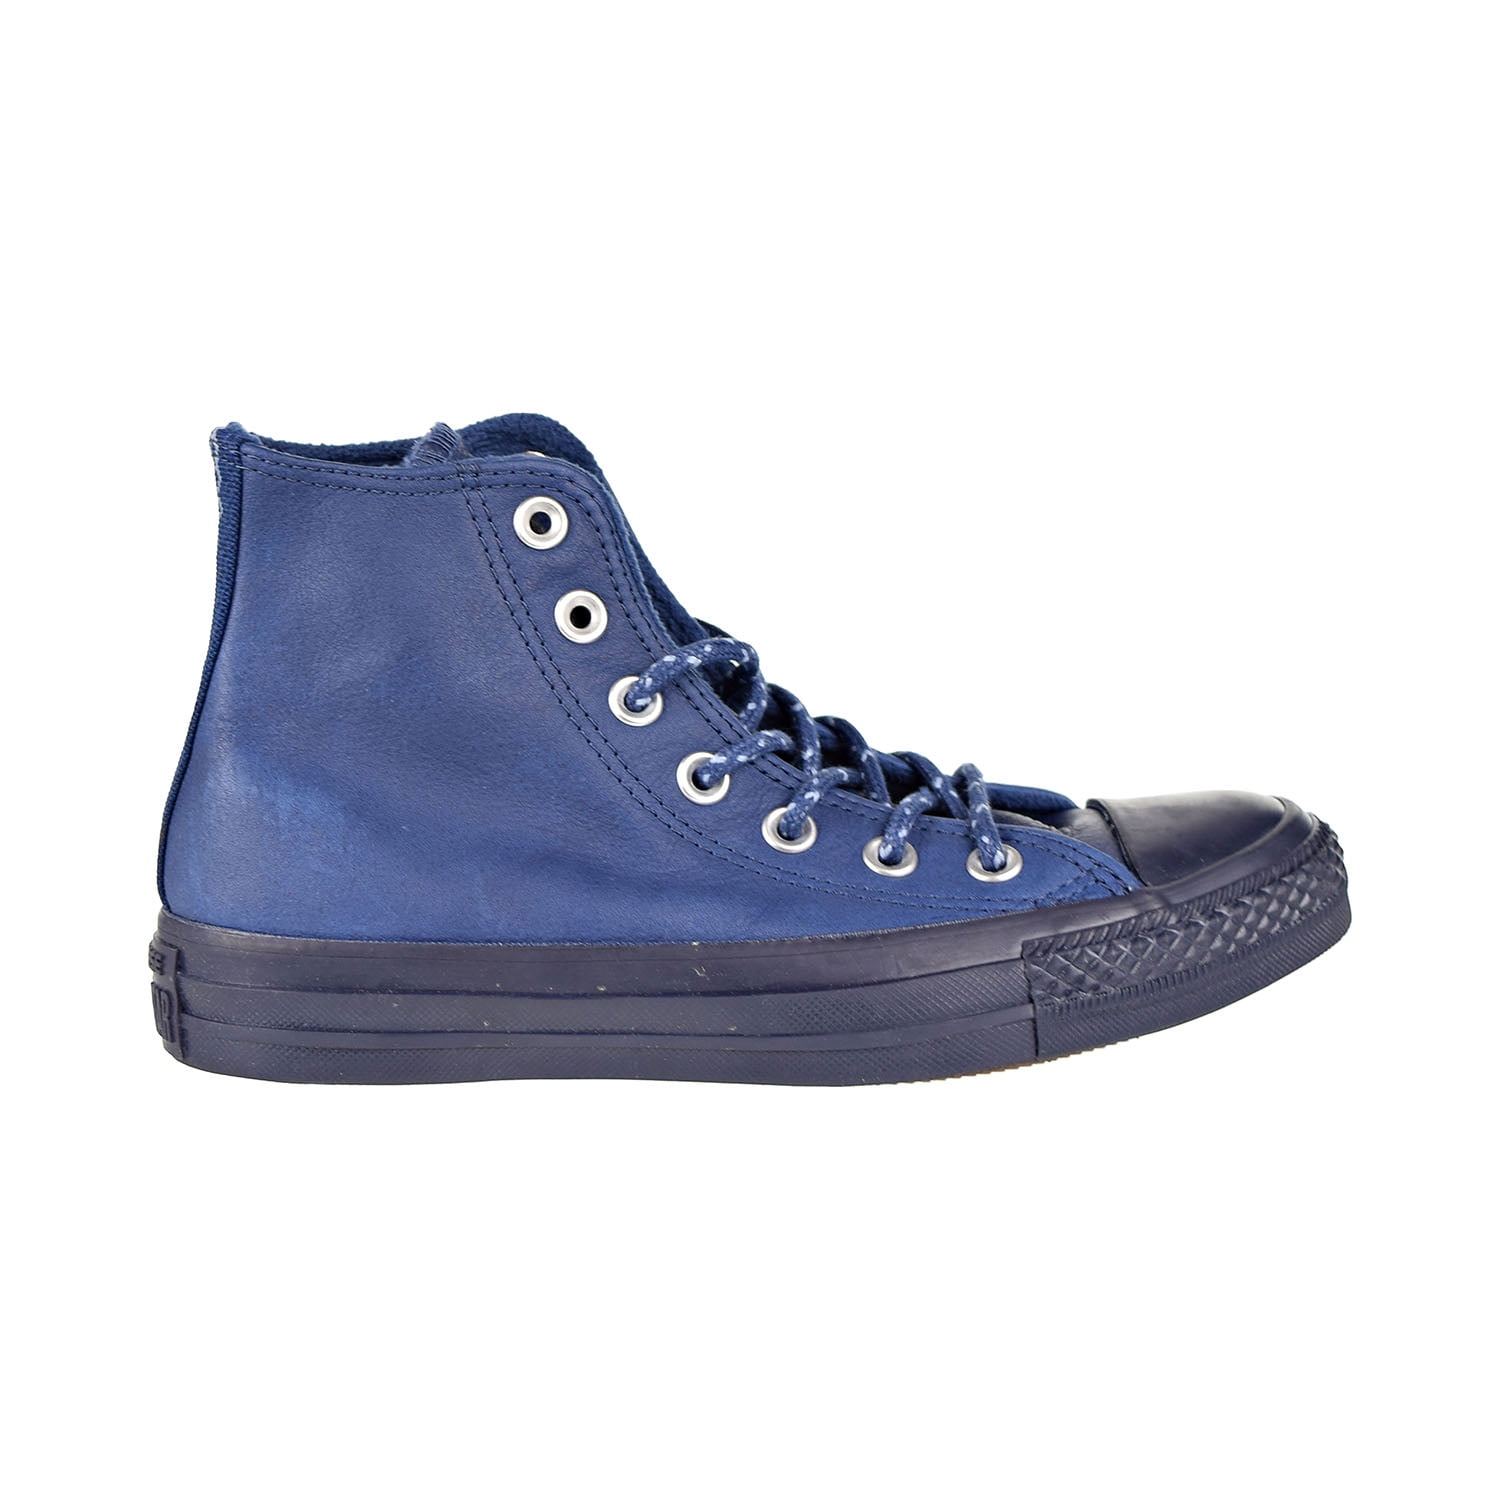 Converse Chuck Taylor All Star Hi Leather Men's Shoes Midnight Navy-Blue  Slate 157515c 